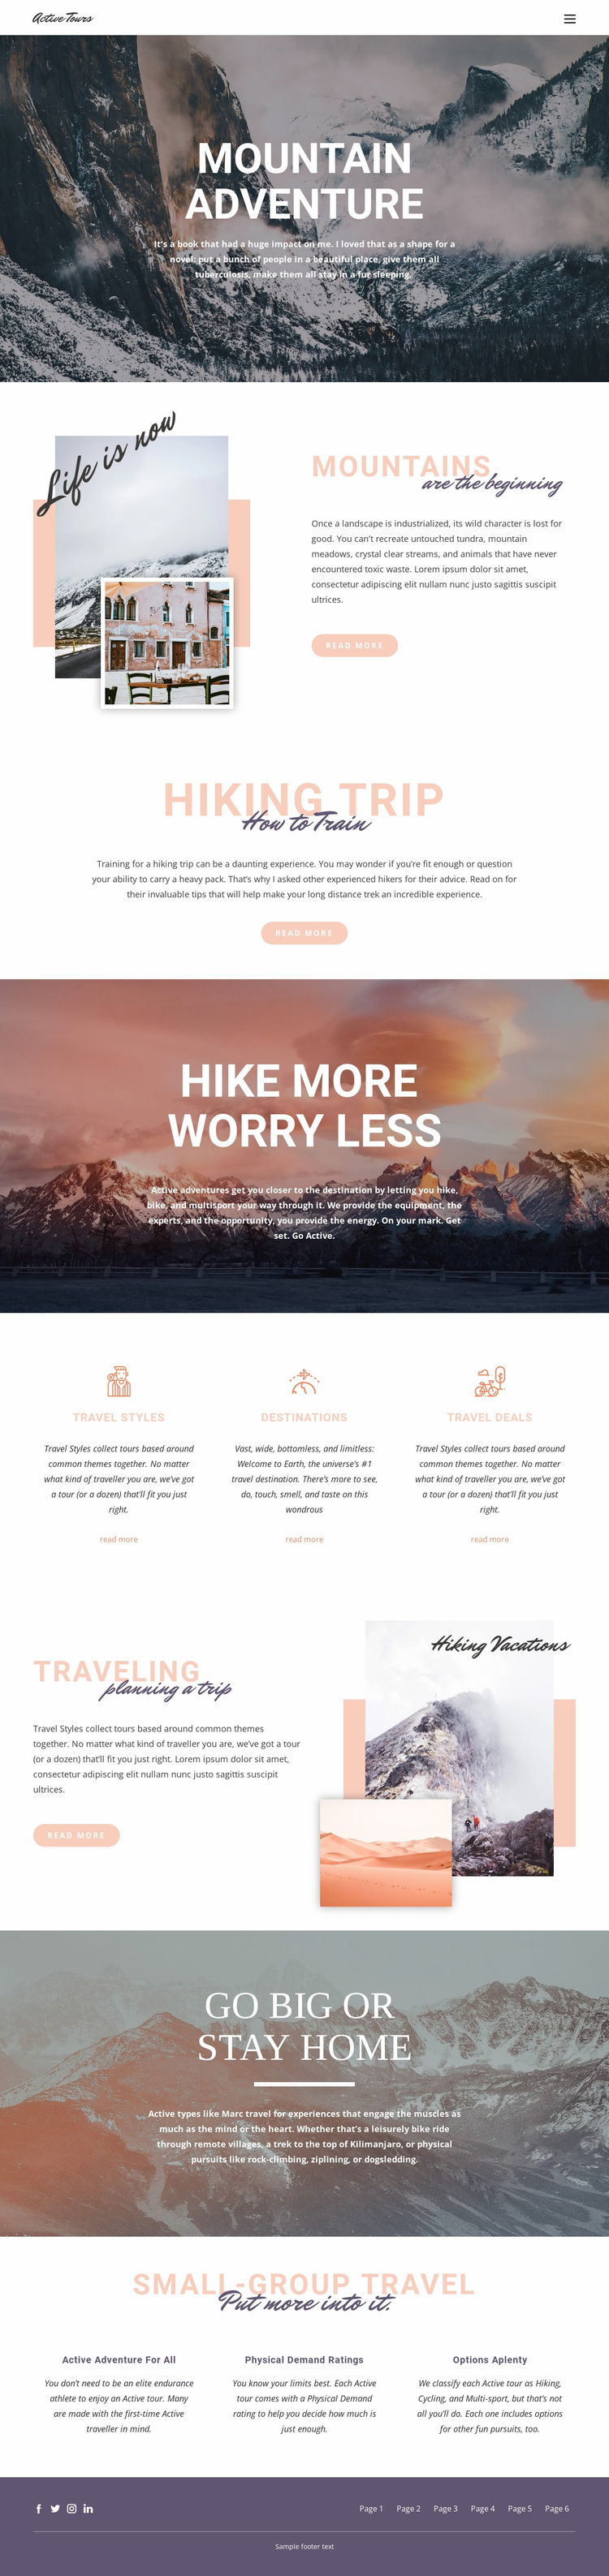 Guided backpacking trips Website Design